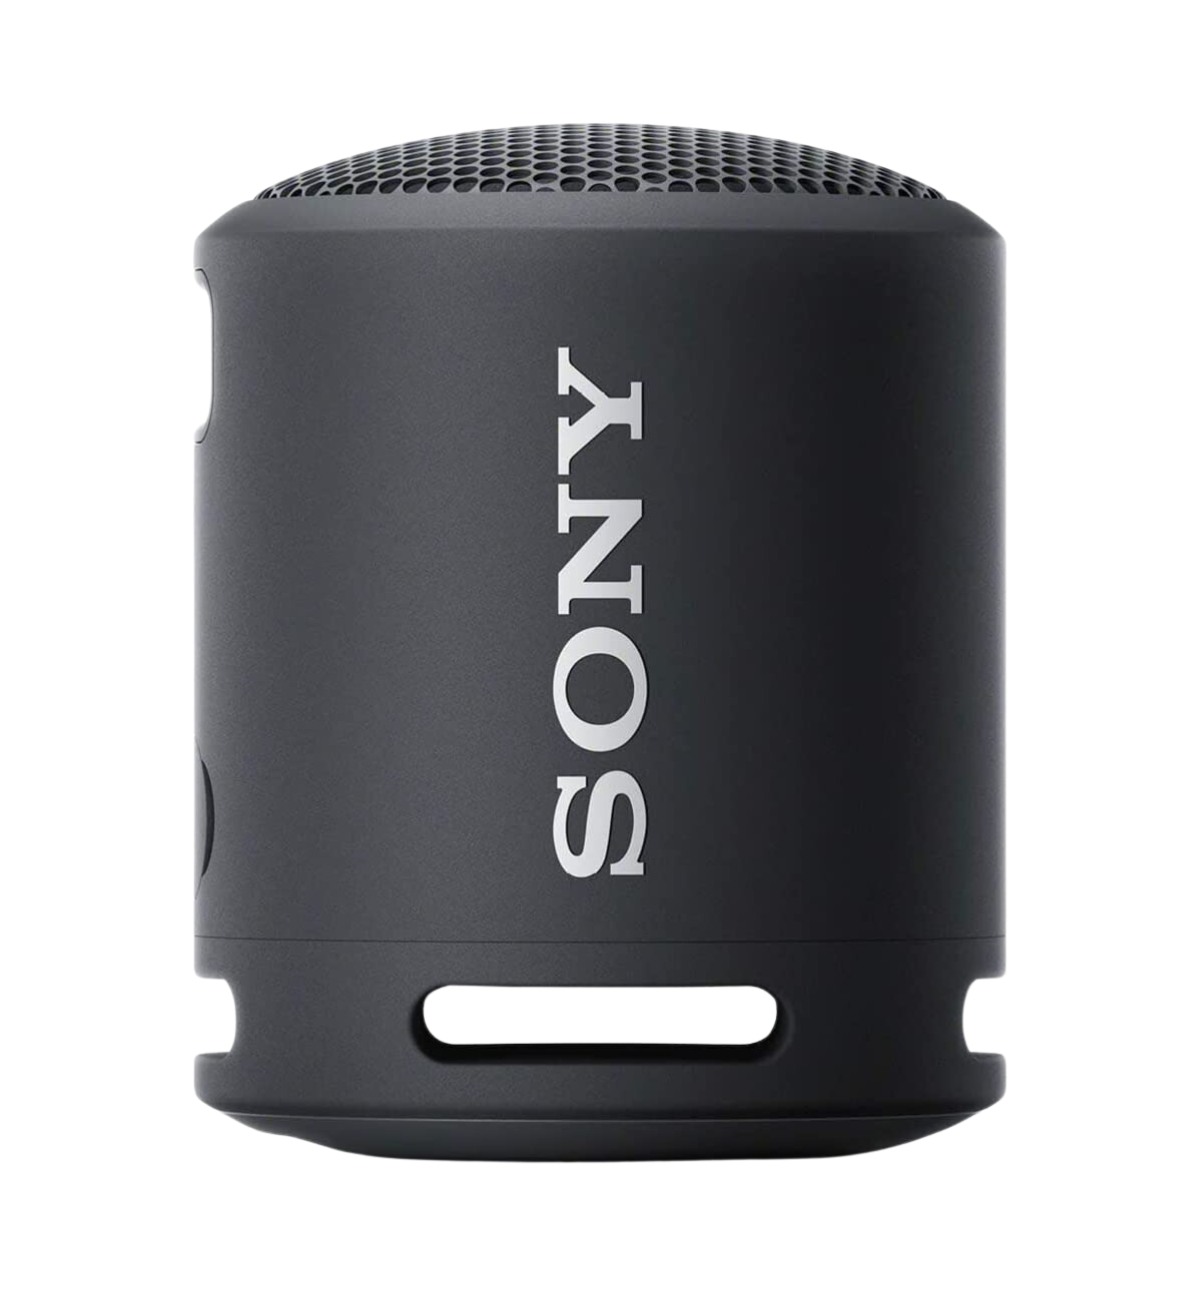 Close-up of a black Sony SRS-XB13 wireless speaker, showing its compact size and rounded design.